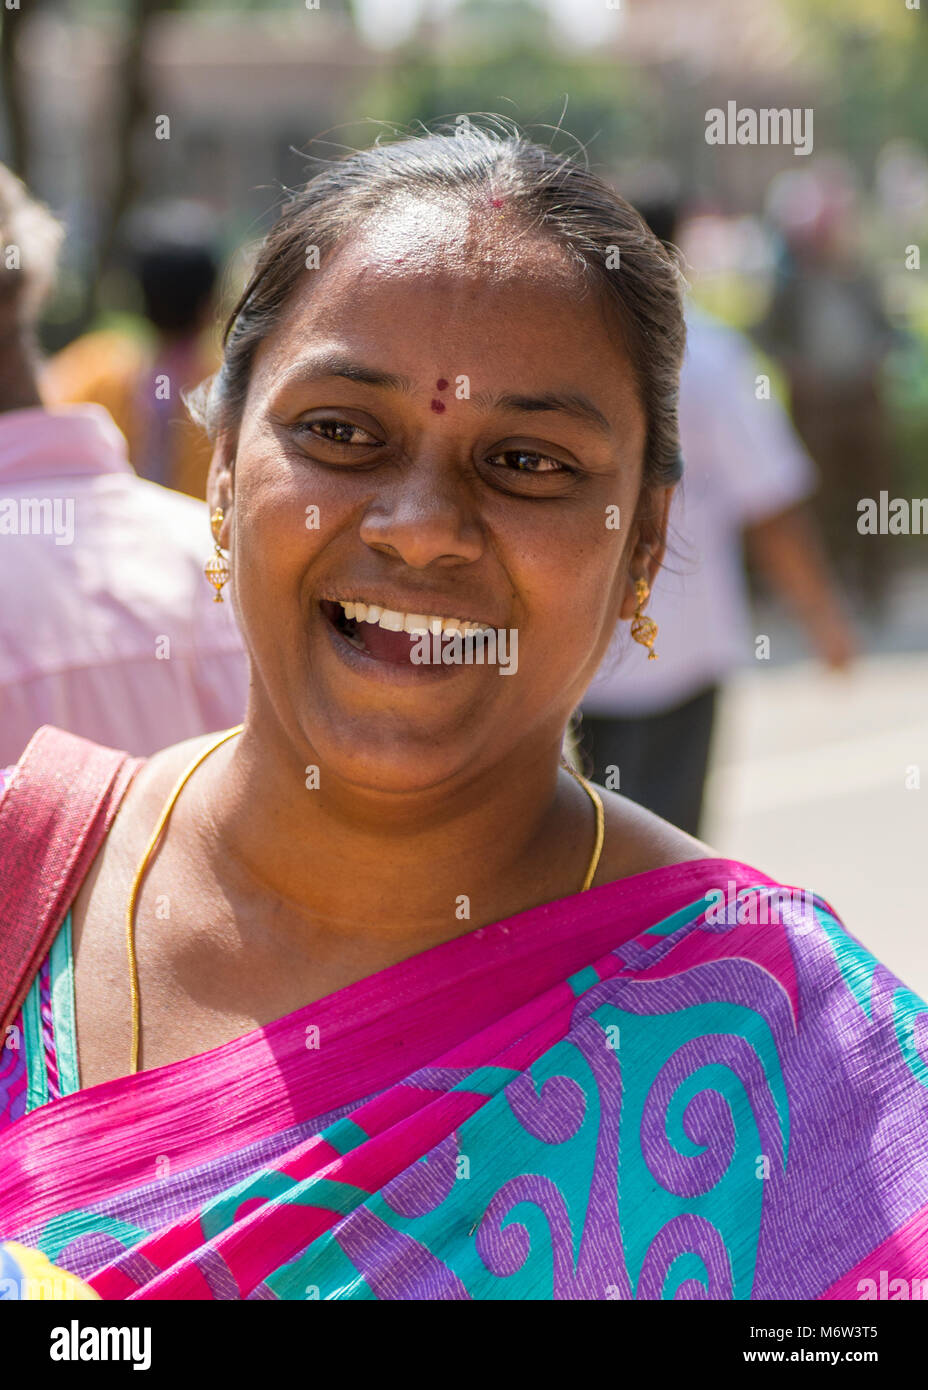 Portrait of a smiling Indian woman wearing a pink, purple and green sari (saree) in New Delhi, India Stock Photo